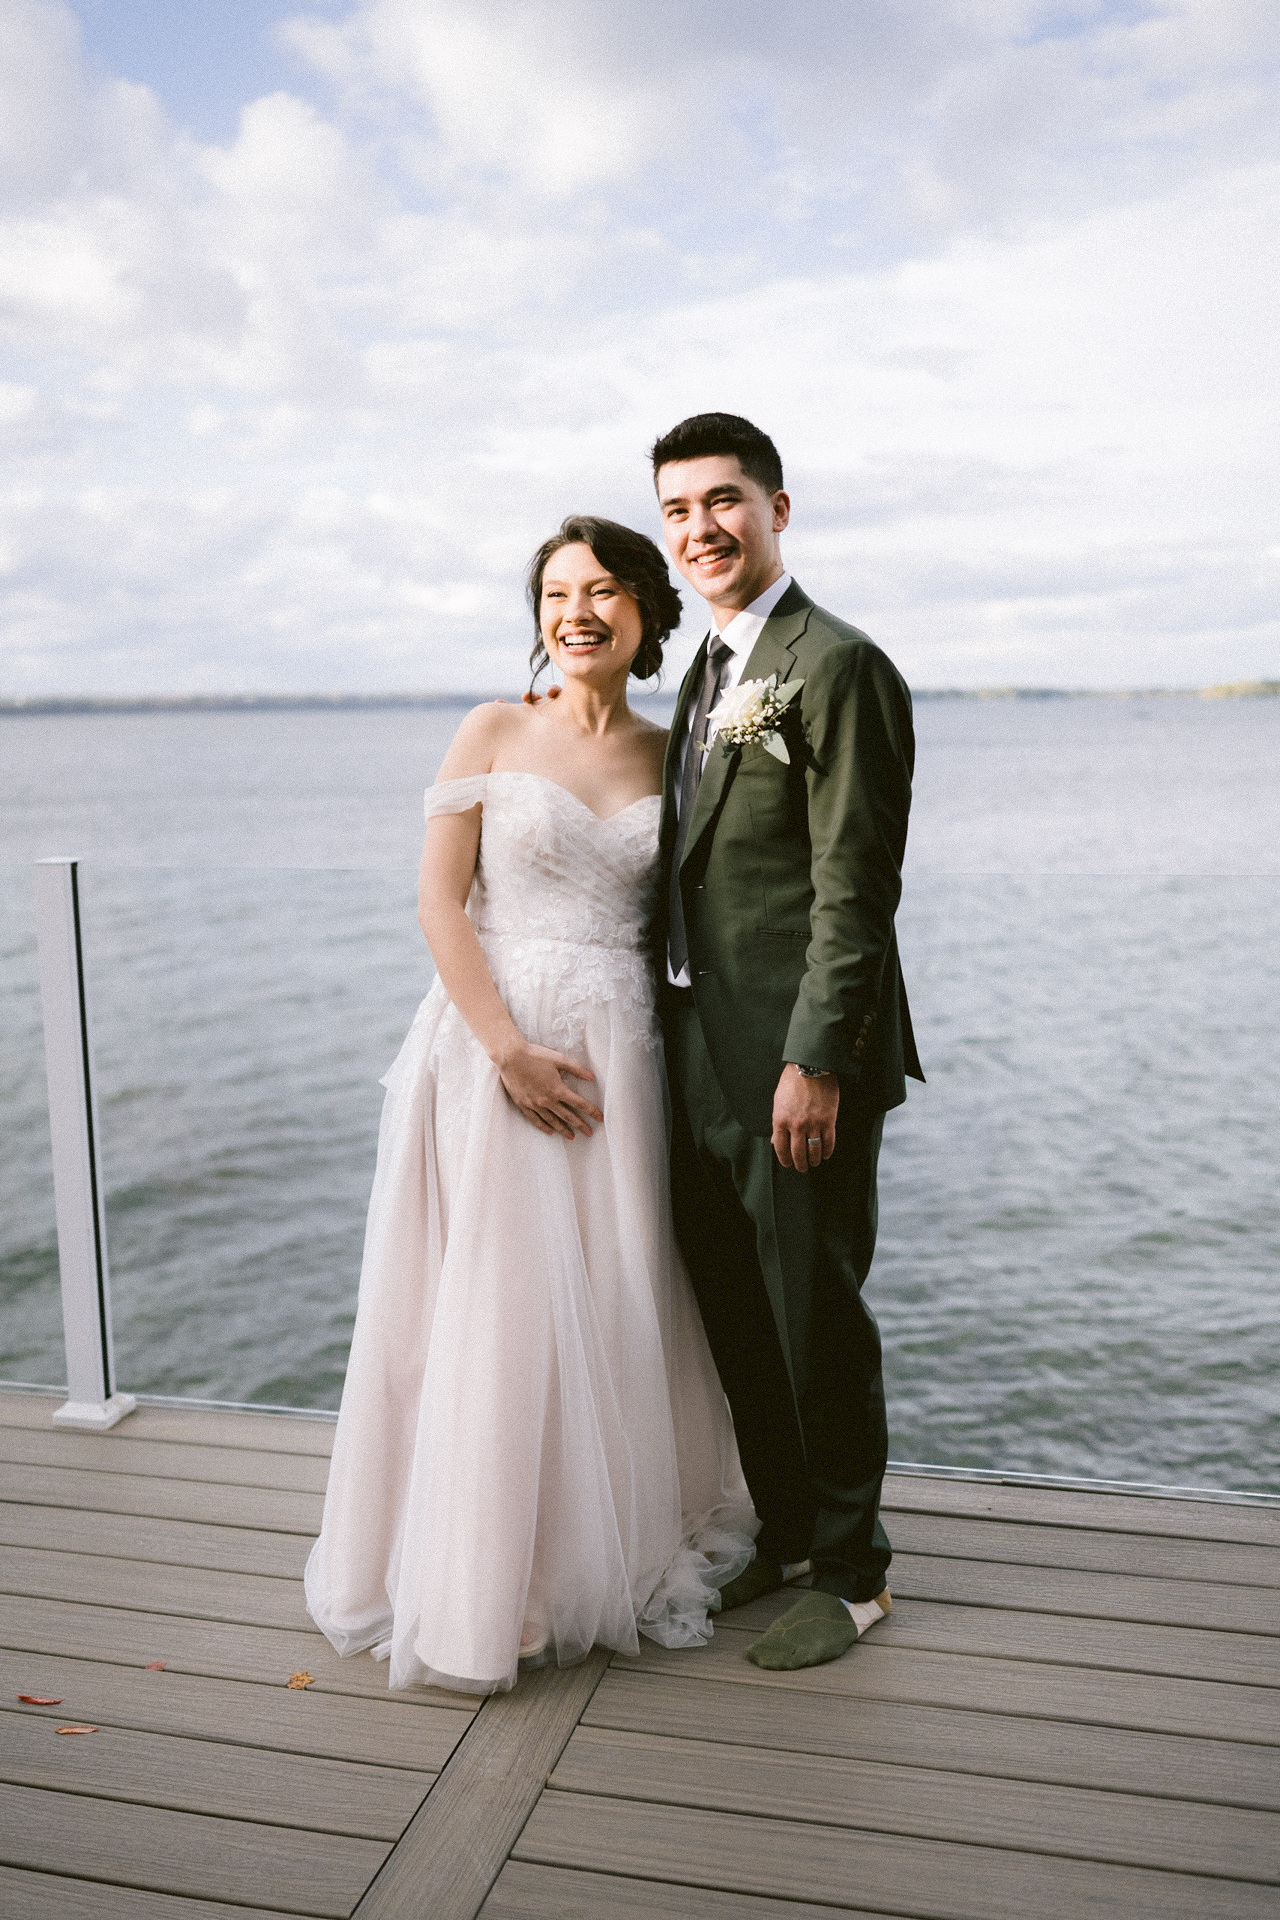 A bride and groom smiling together on a dock by the water